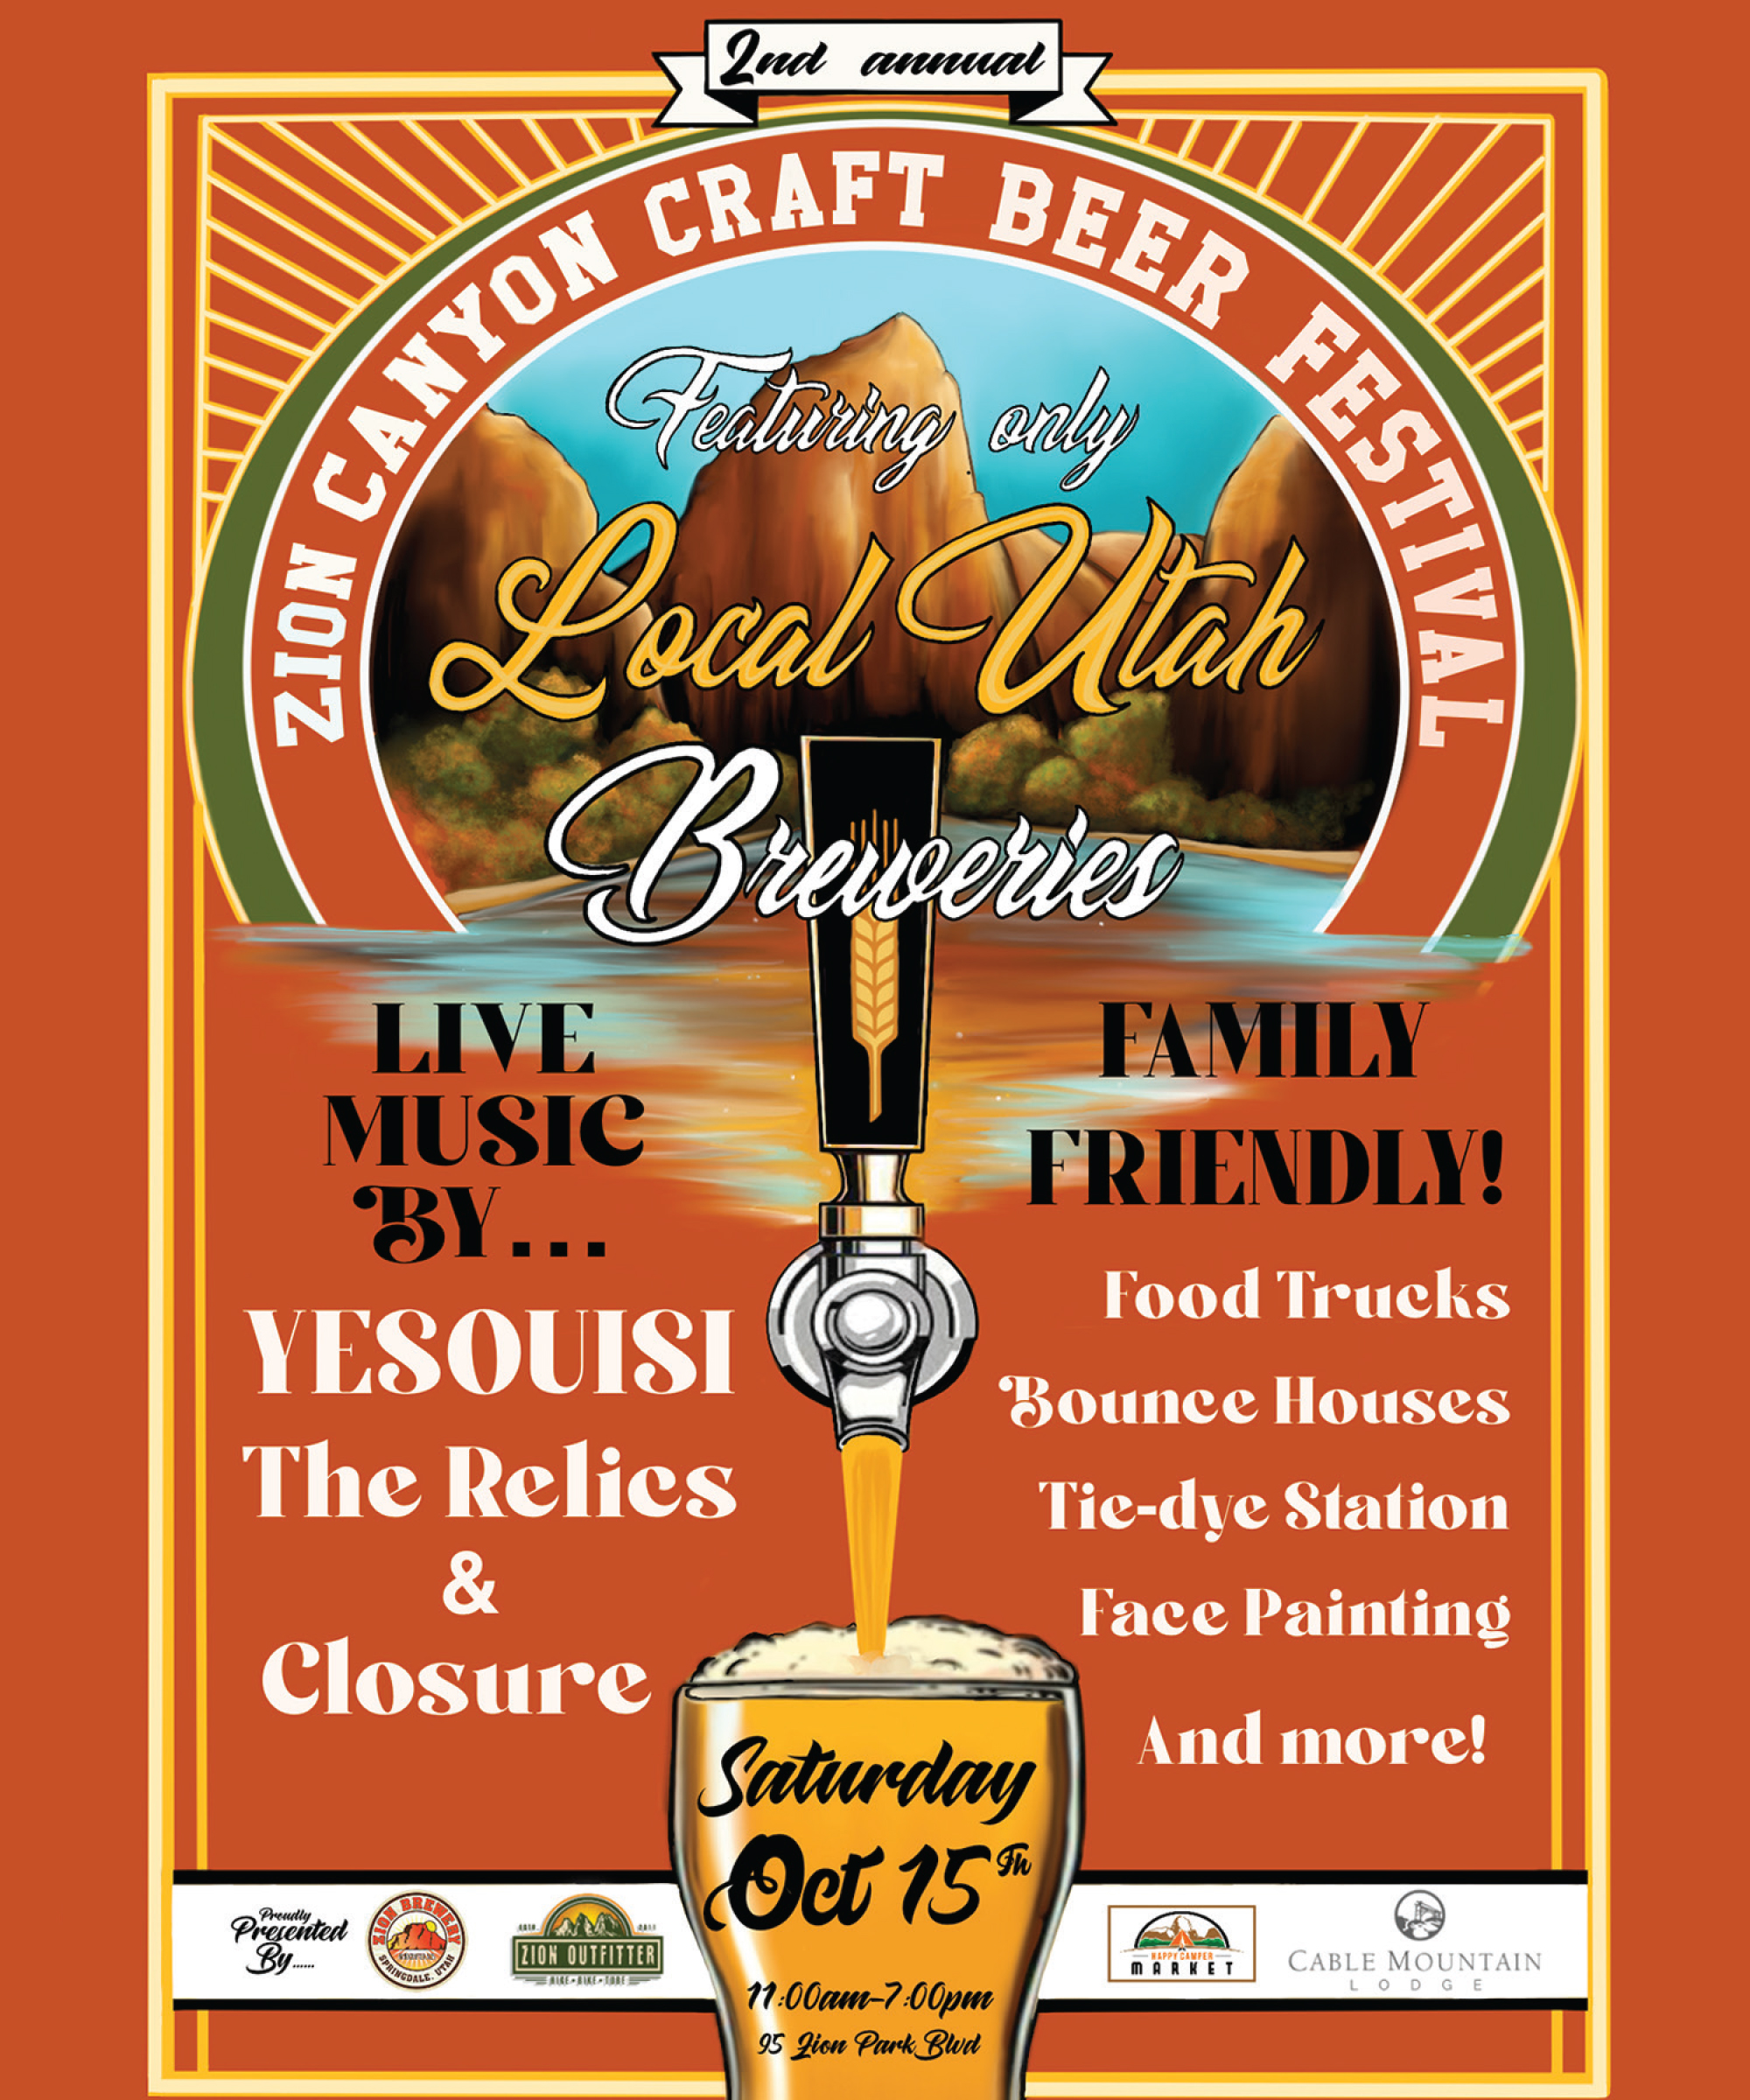 Zion Canyon Craft Beer Festival